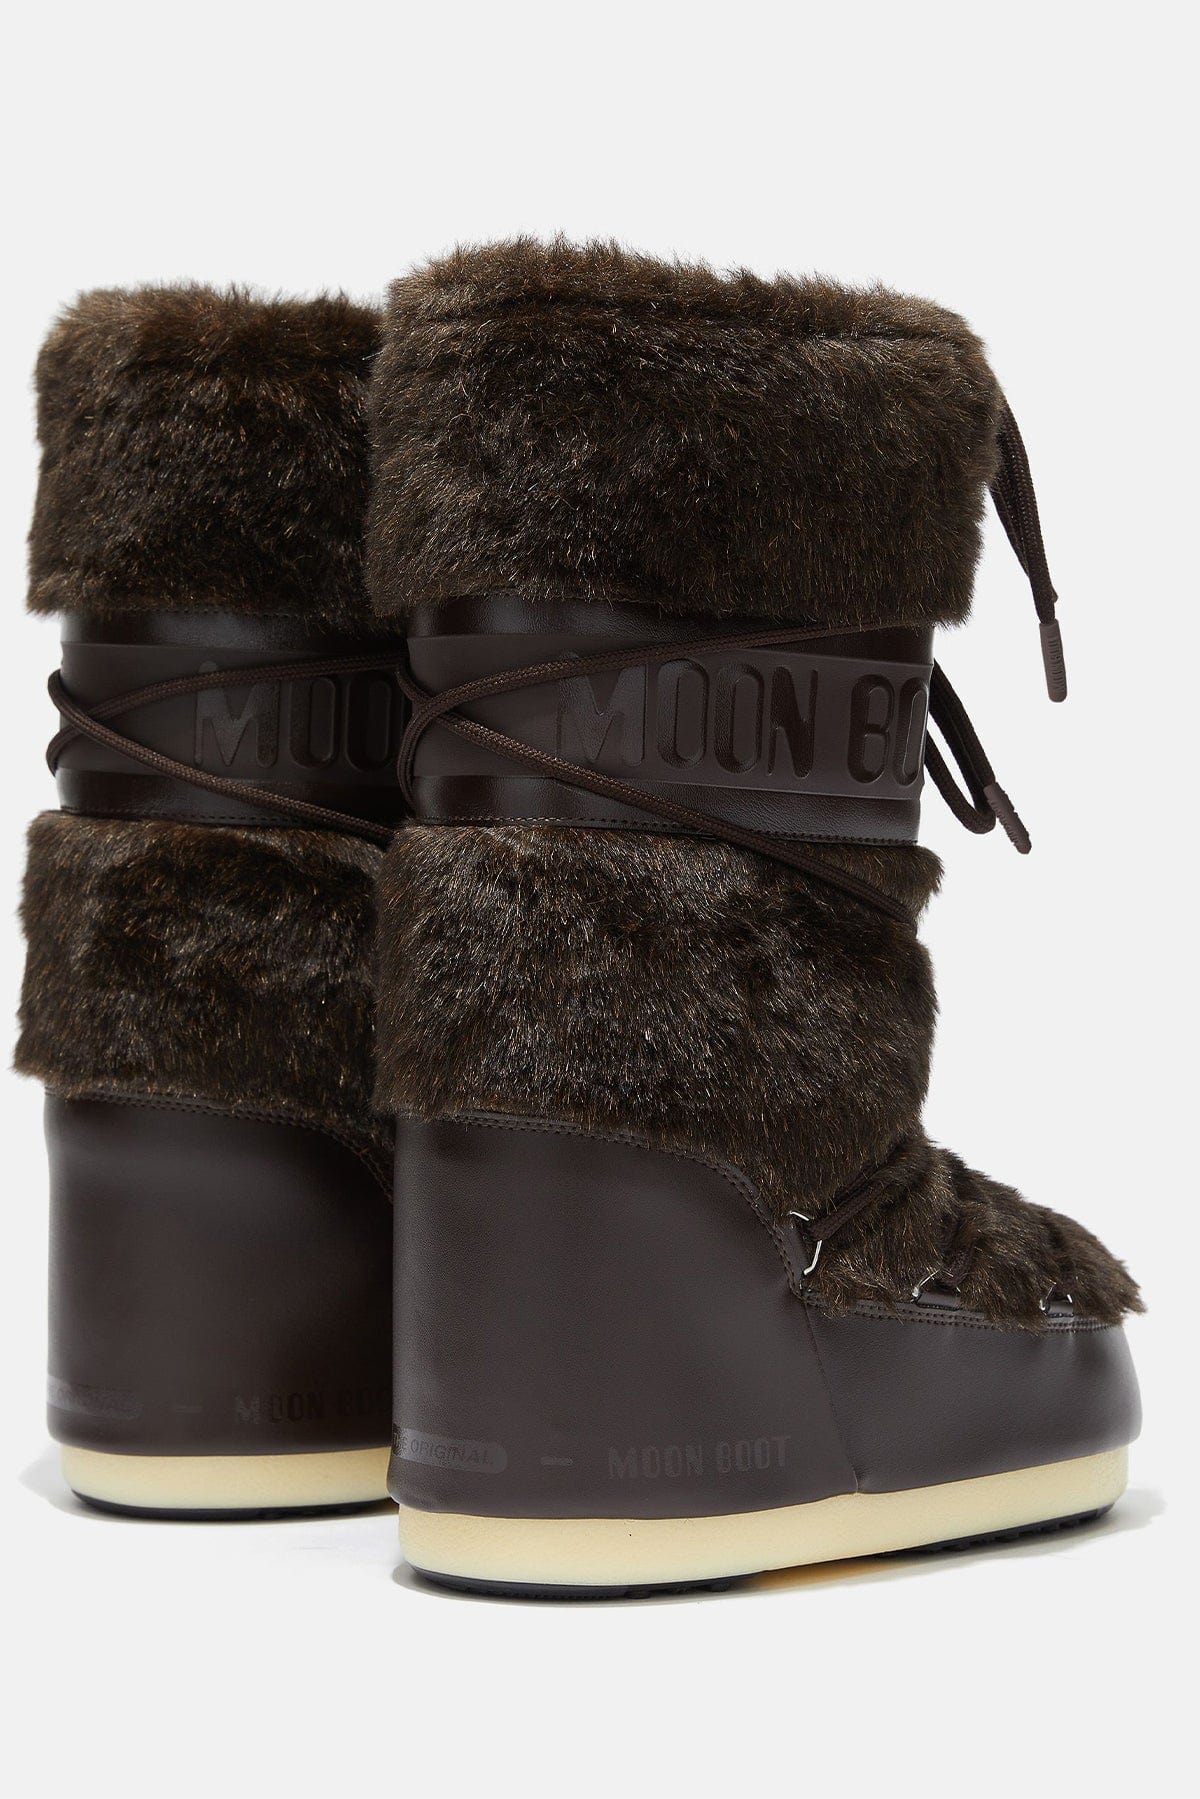 MOON BOOT CALZATURE  Moon Boot Alti Donna Faux Fur